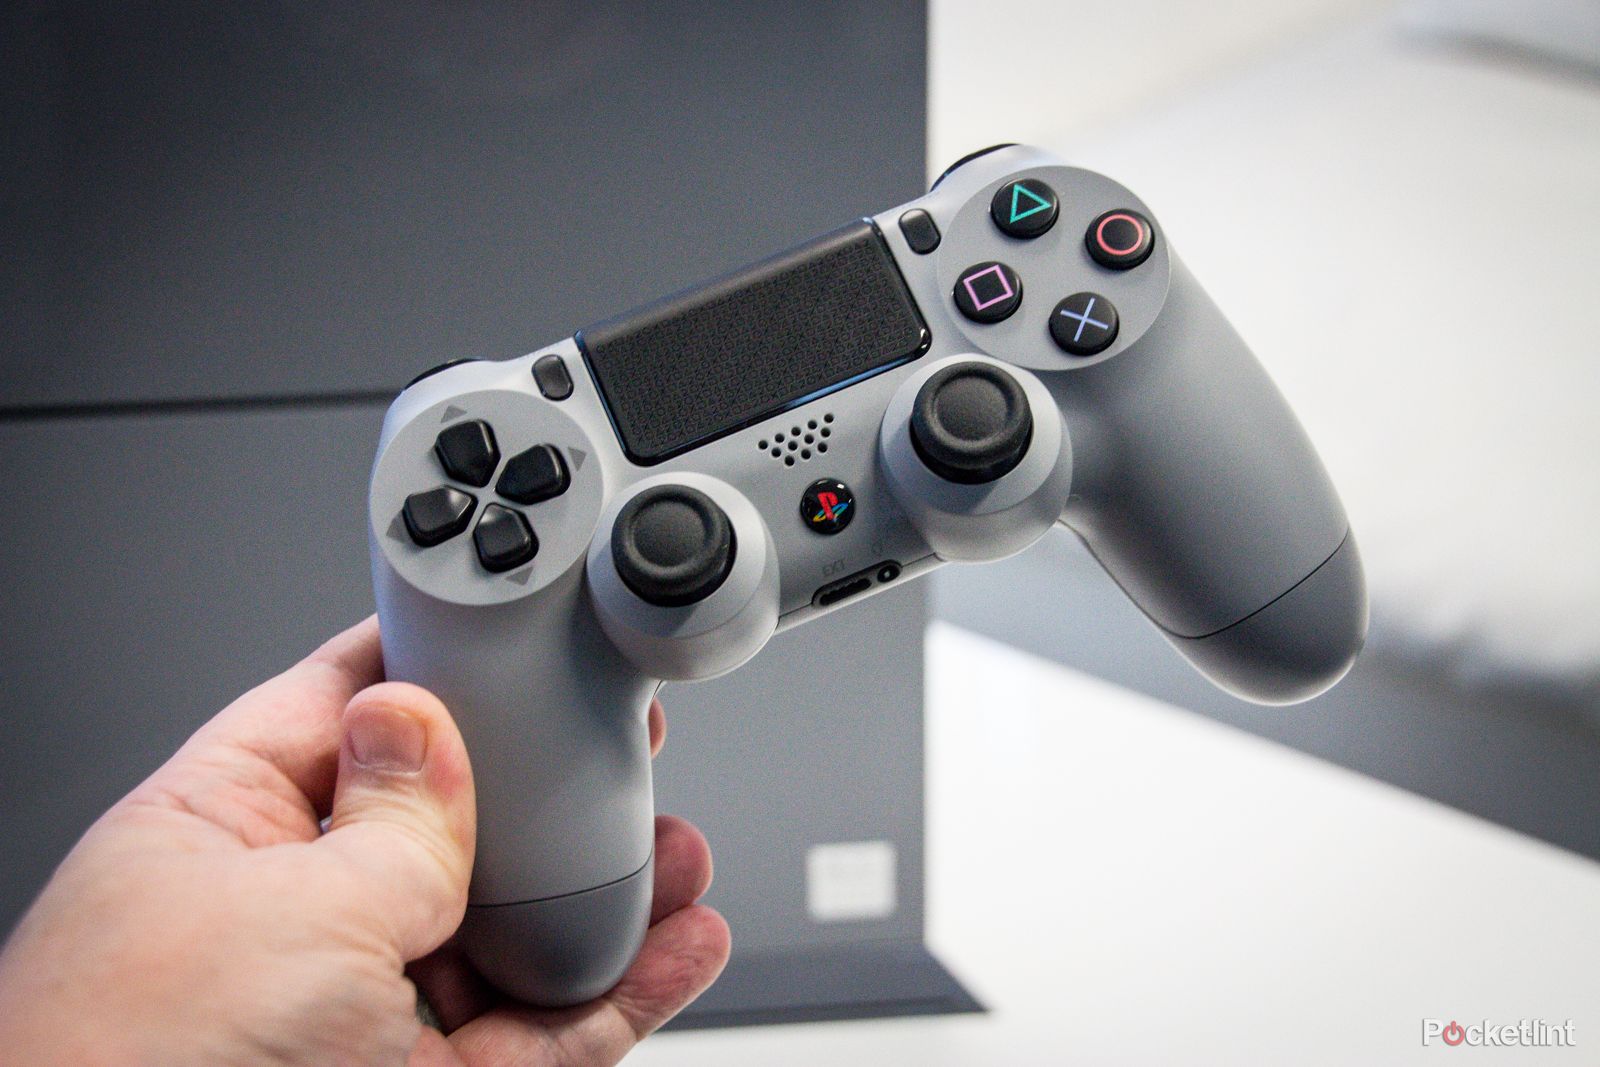 Remember the limited edition 20th Anniversary PS4 DualShock 4 you